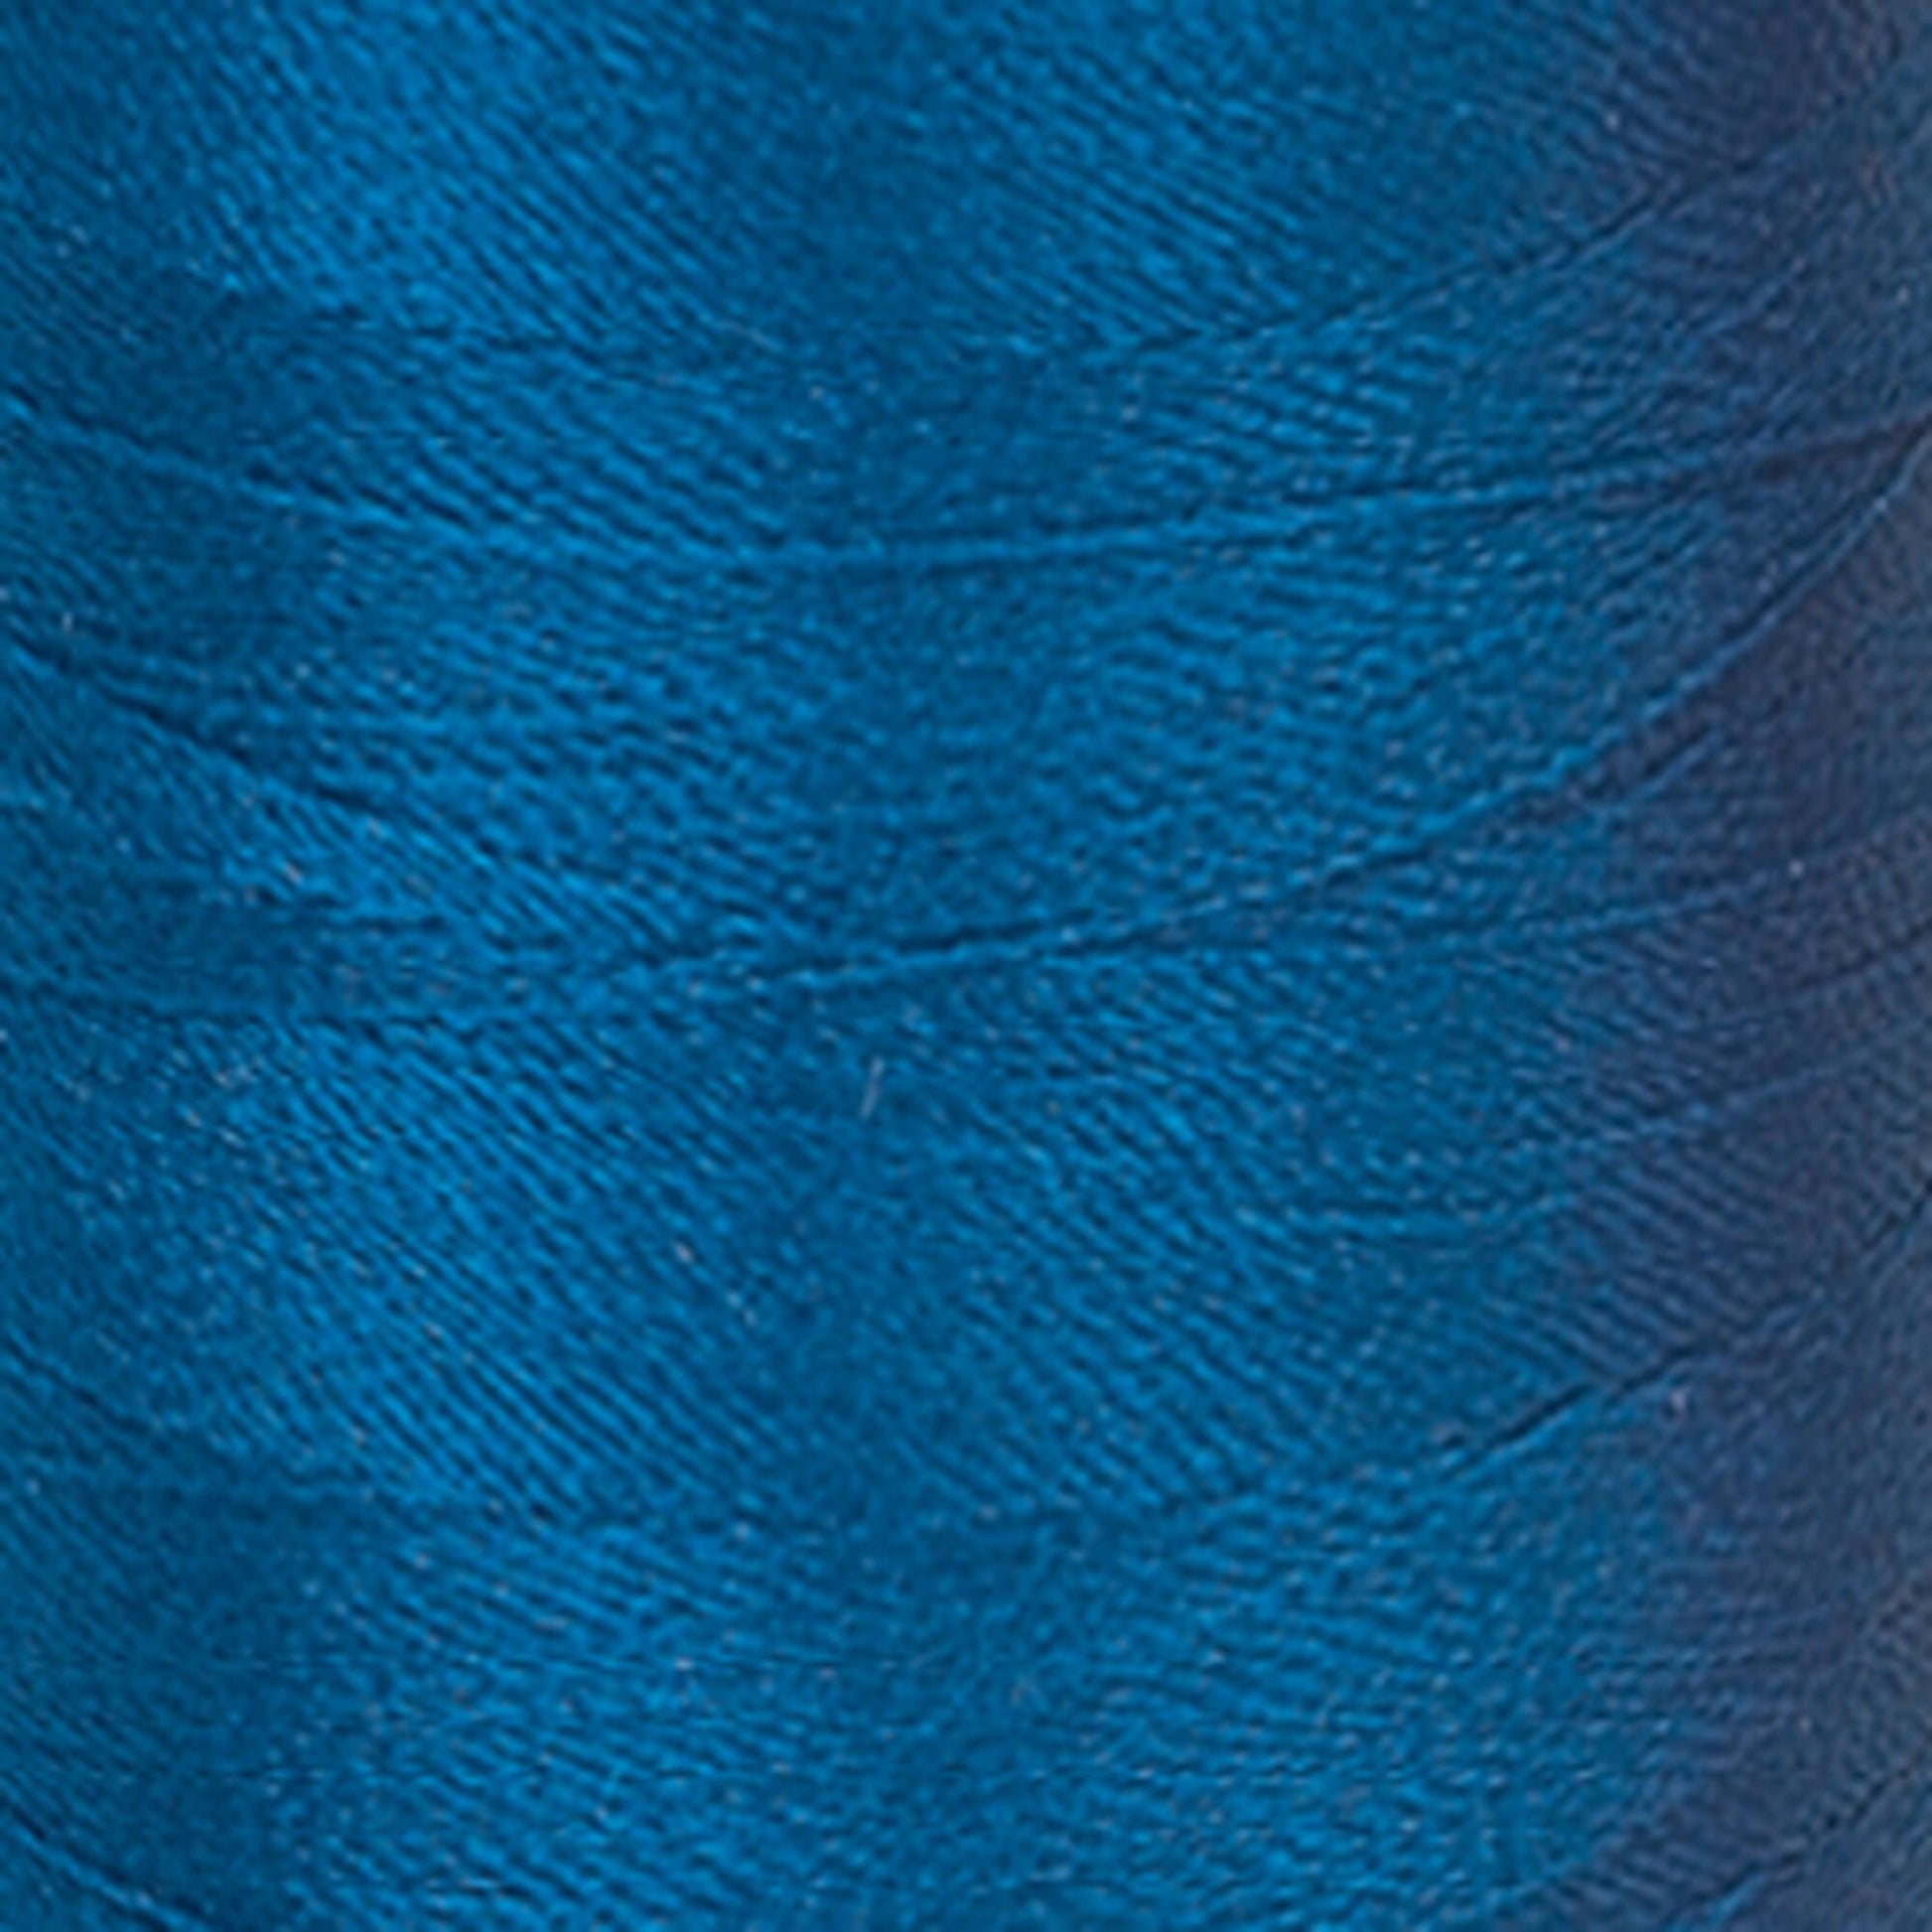 Coats & Clark Machine Embroidery Thread (1100 Yards) Soldier Blue